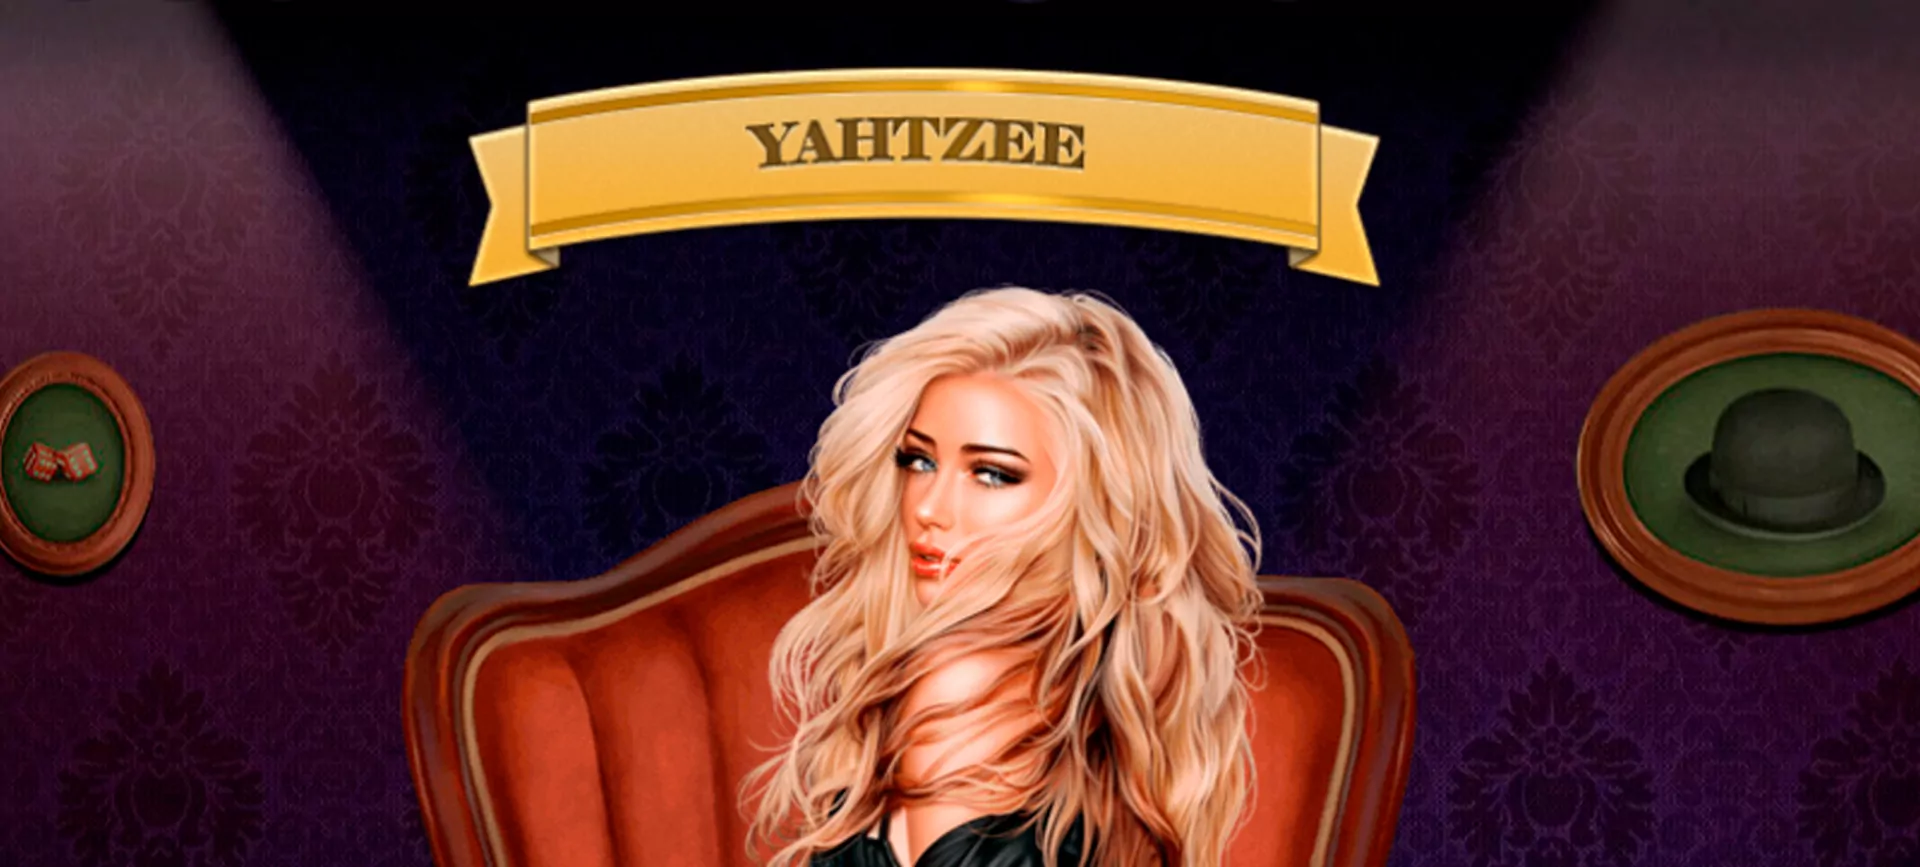 Play online in the Yahtzee game.